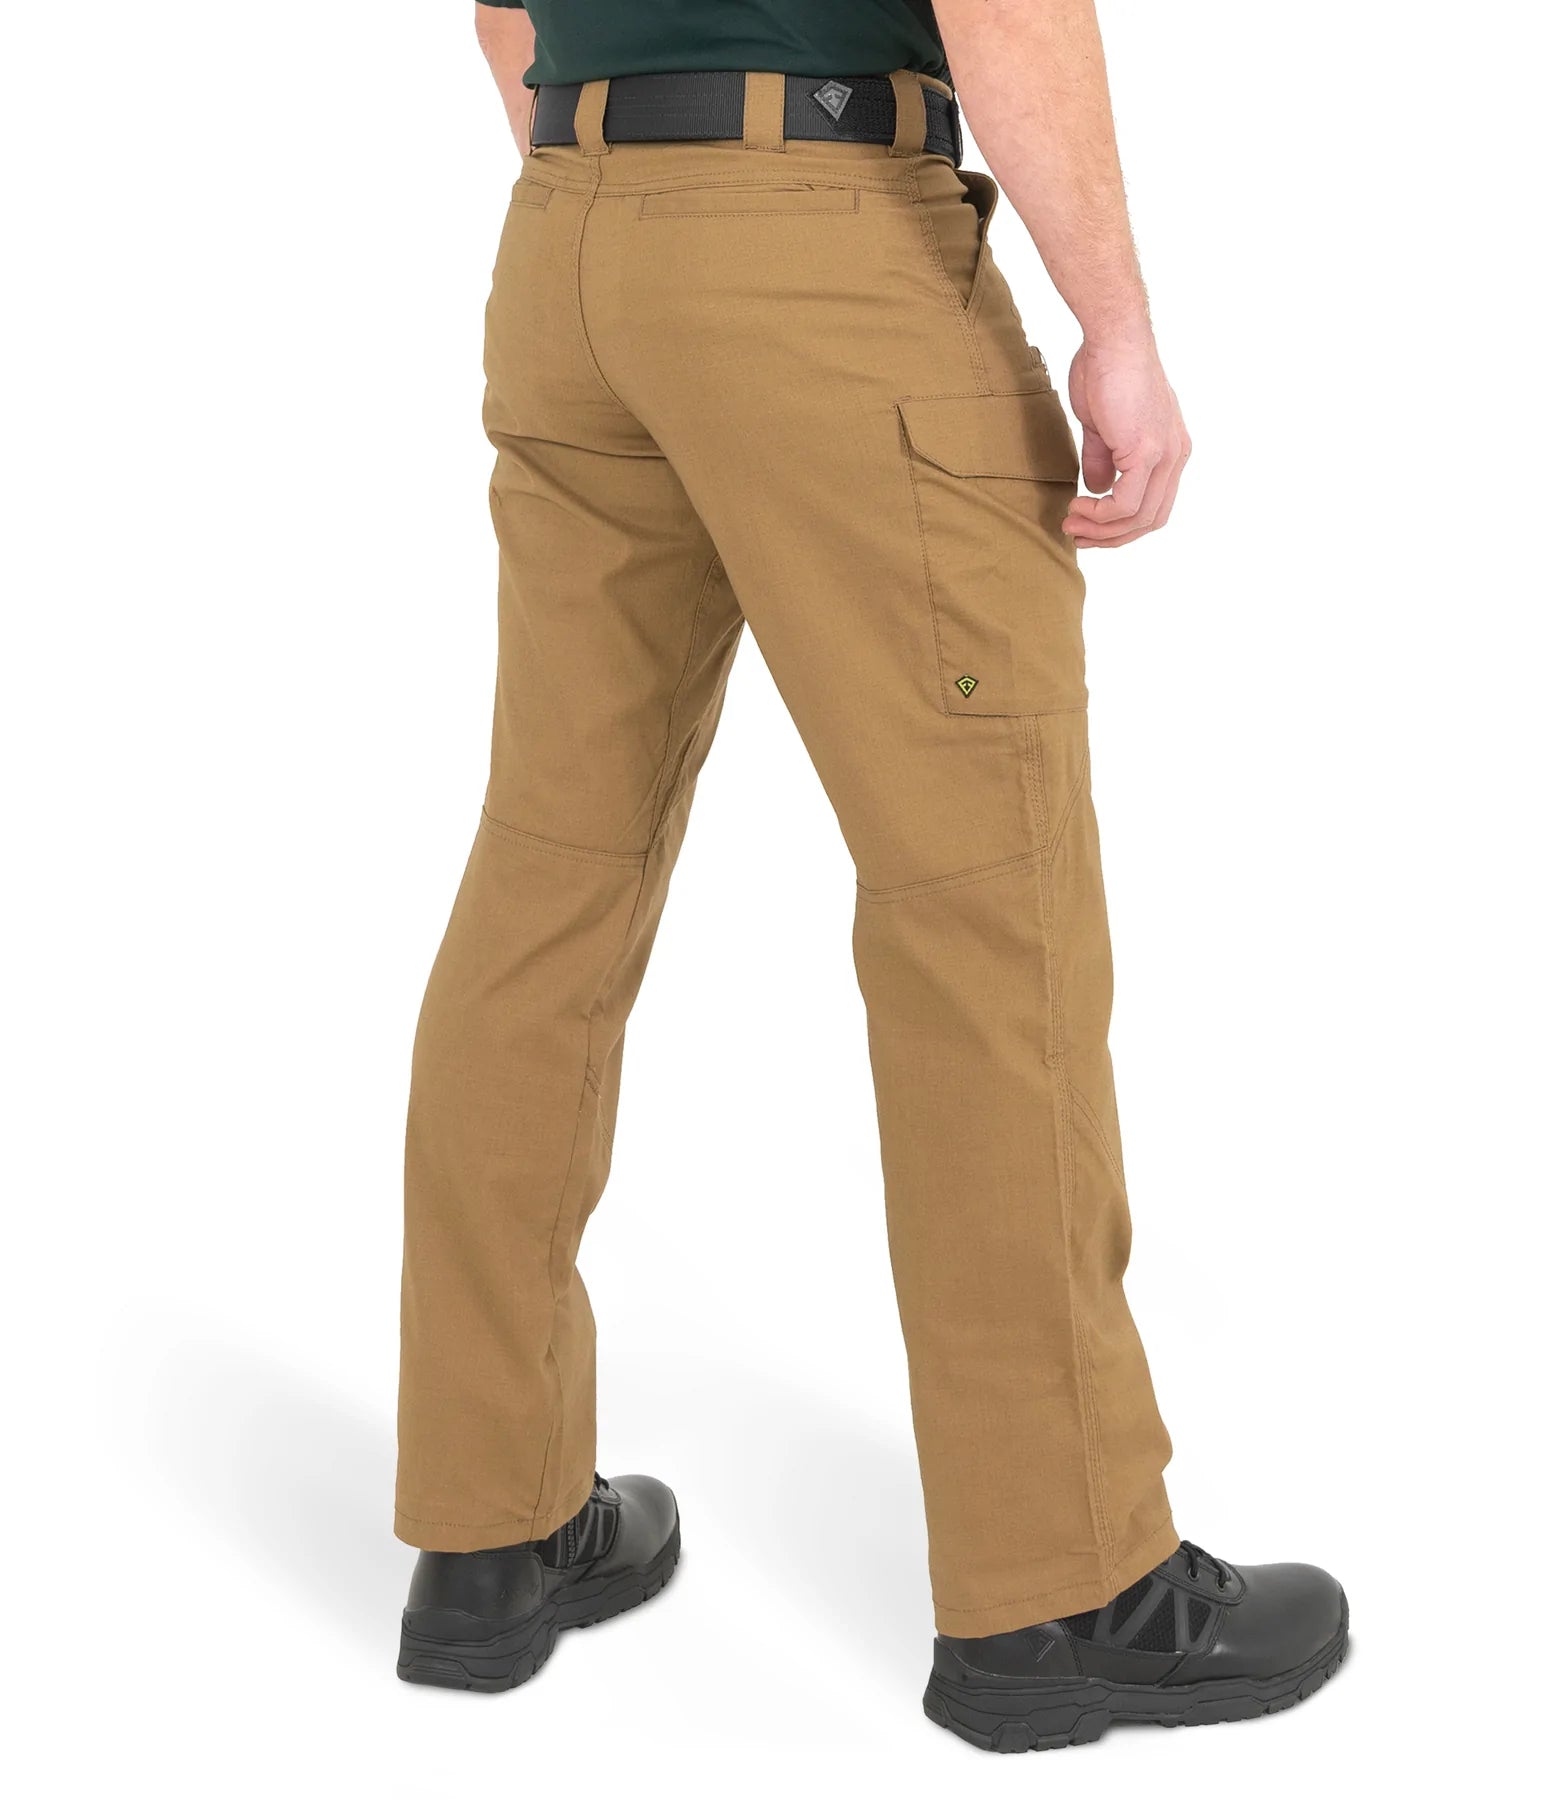 First Tactical Men's V2 Tactical Pants (114011) Midnight Navy / Coyote Brown